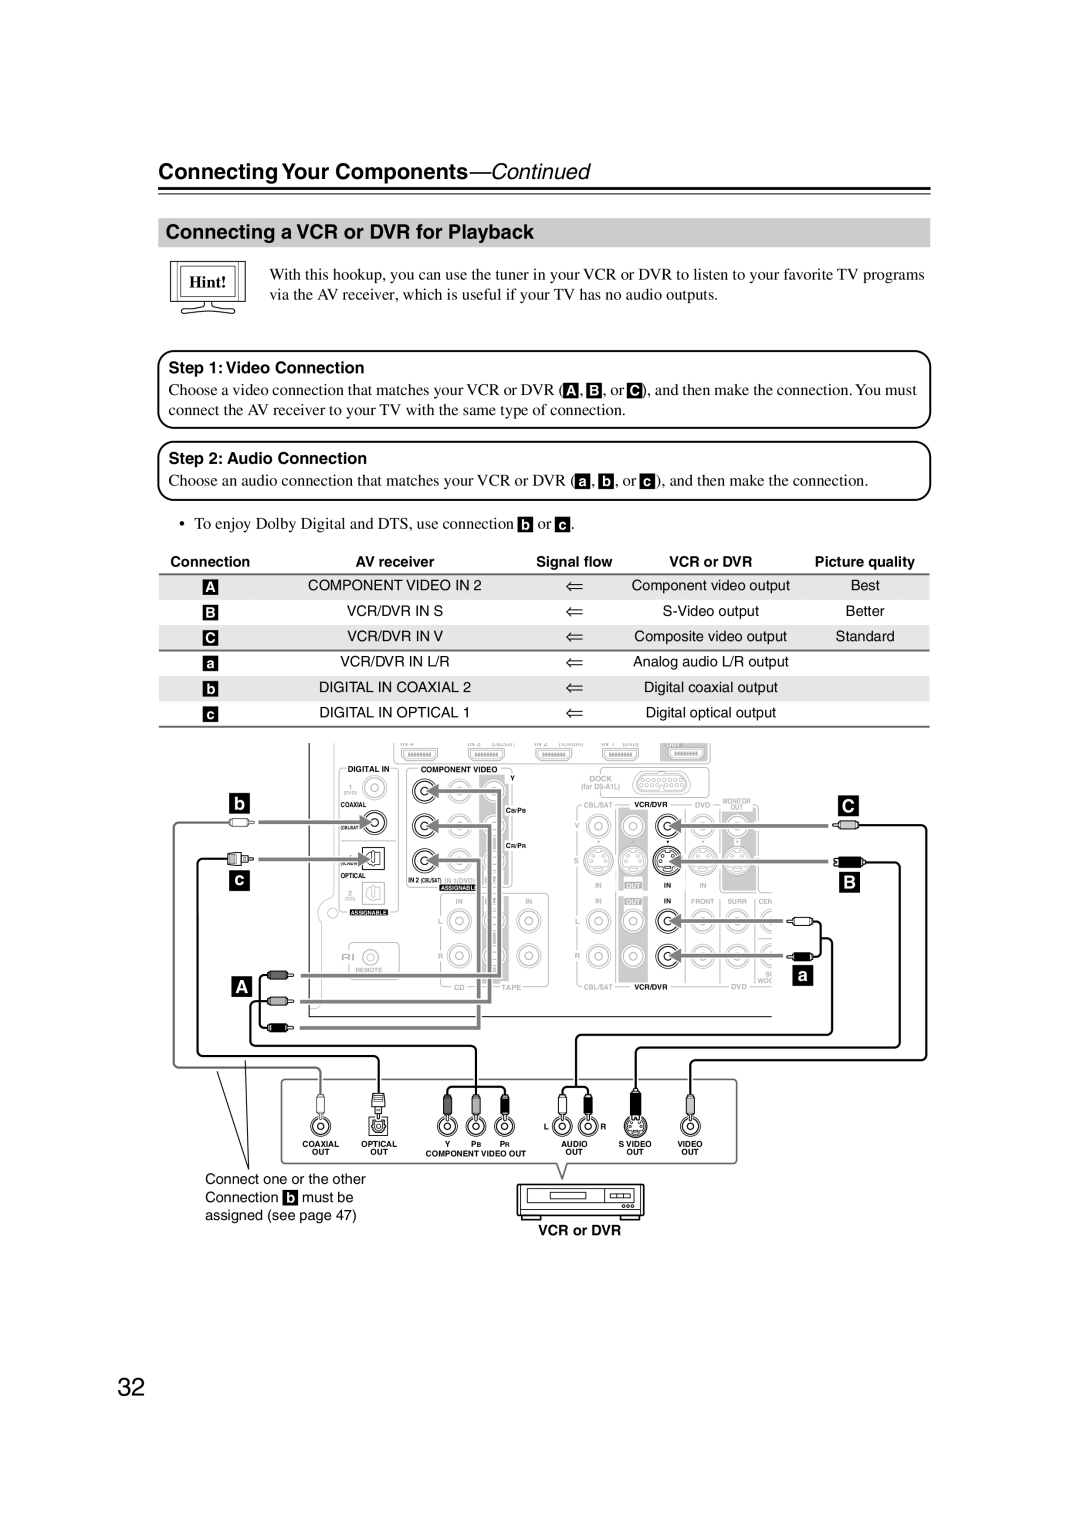 Onkyo HT-S6100 instruction manual Connecting a VCR or DVR for Playback, Connecting Your Components-Continued, Hint 